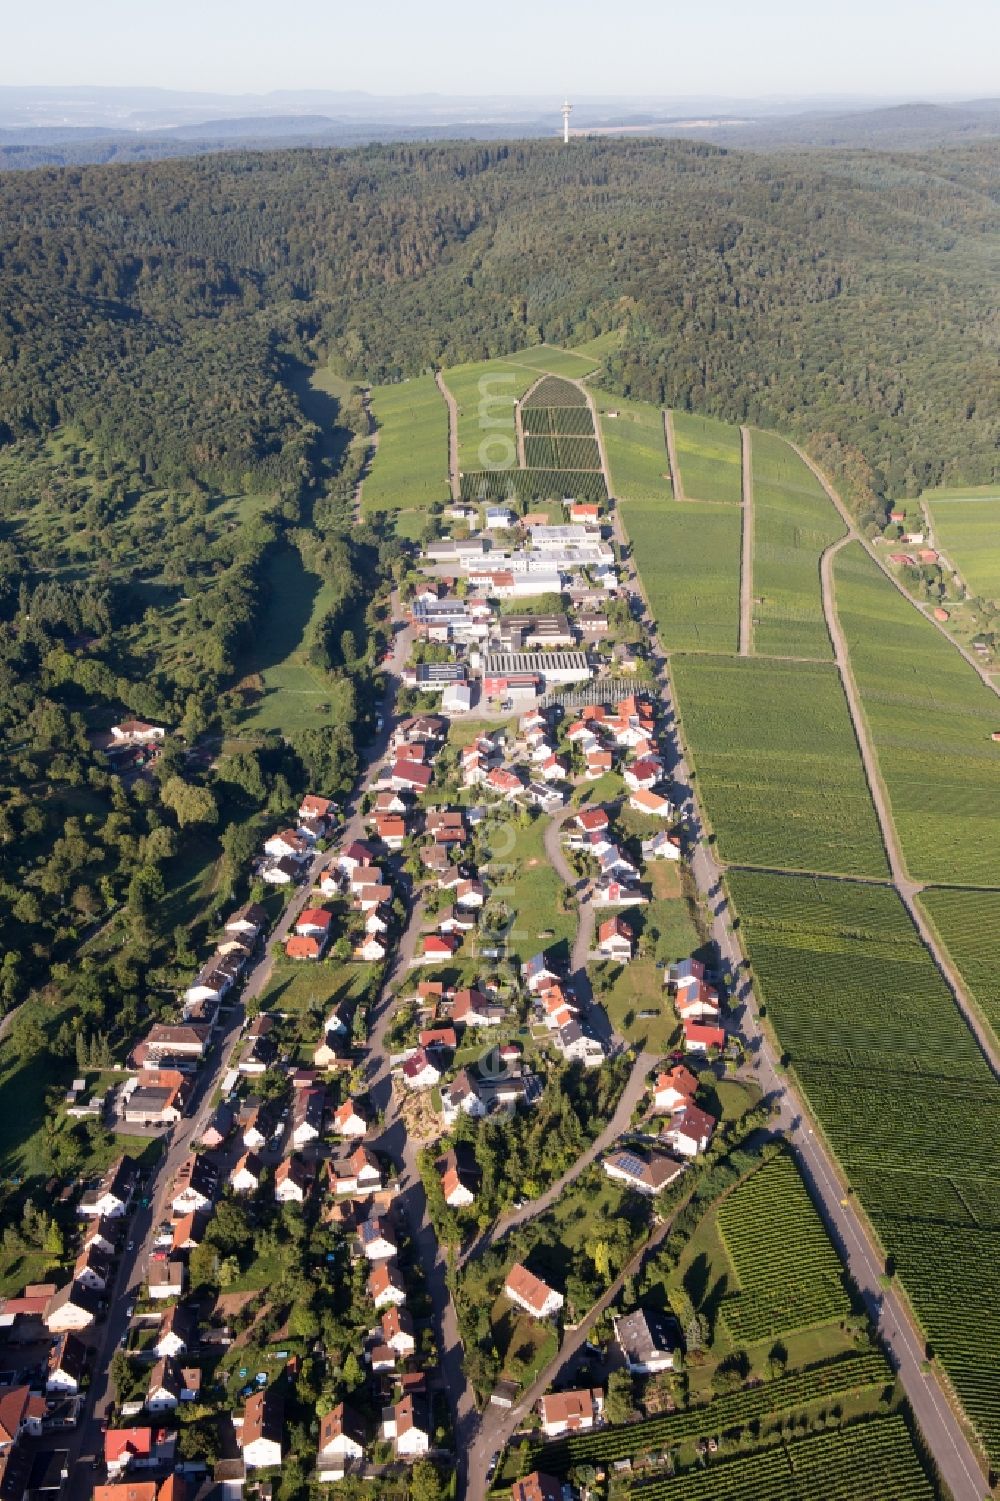 Cleebronn from the bird's eye view: Village view in the district Frauenzimmern in Cleebronn in the state Baden-Wuerttemberg